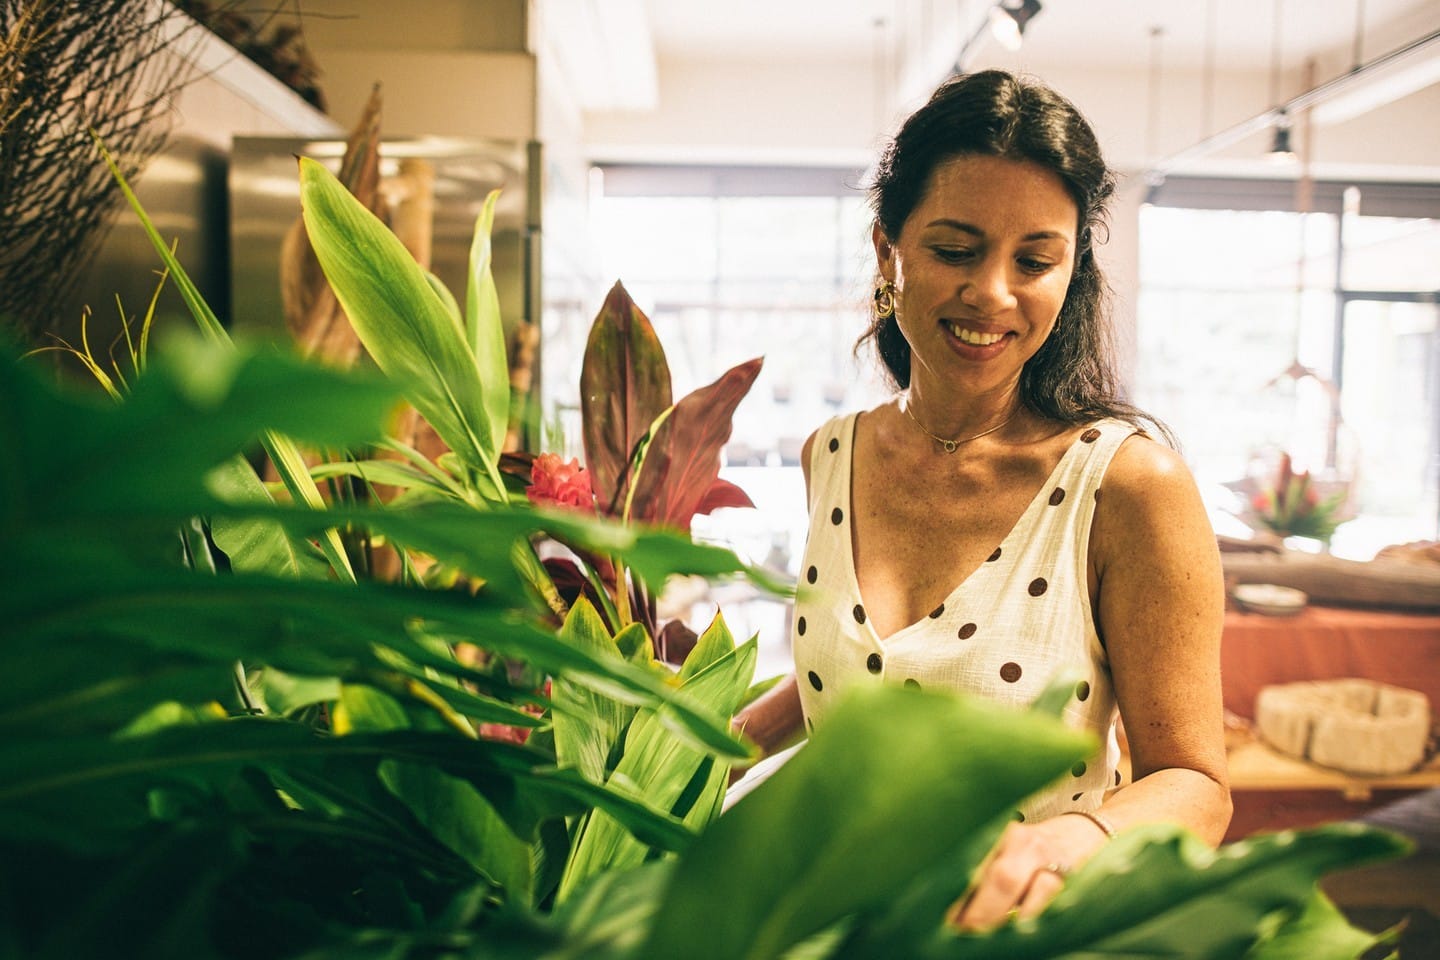 Celebrate all things spring at Bloom! Garden + Art Festival returning to East Village Shops and Ward Centre on Friday & Sunday, April 7 & 8. Browse and buy local plants, pottery, orchids, handmade items, and learn something new at complimentary workshops.